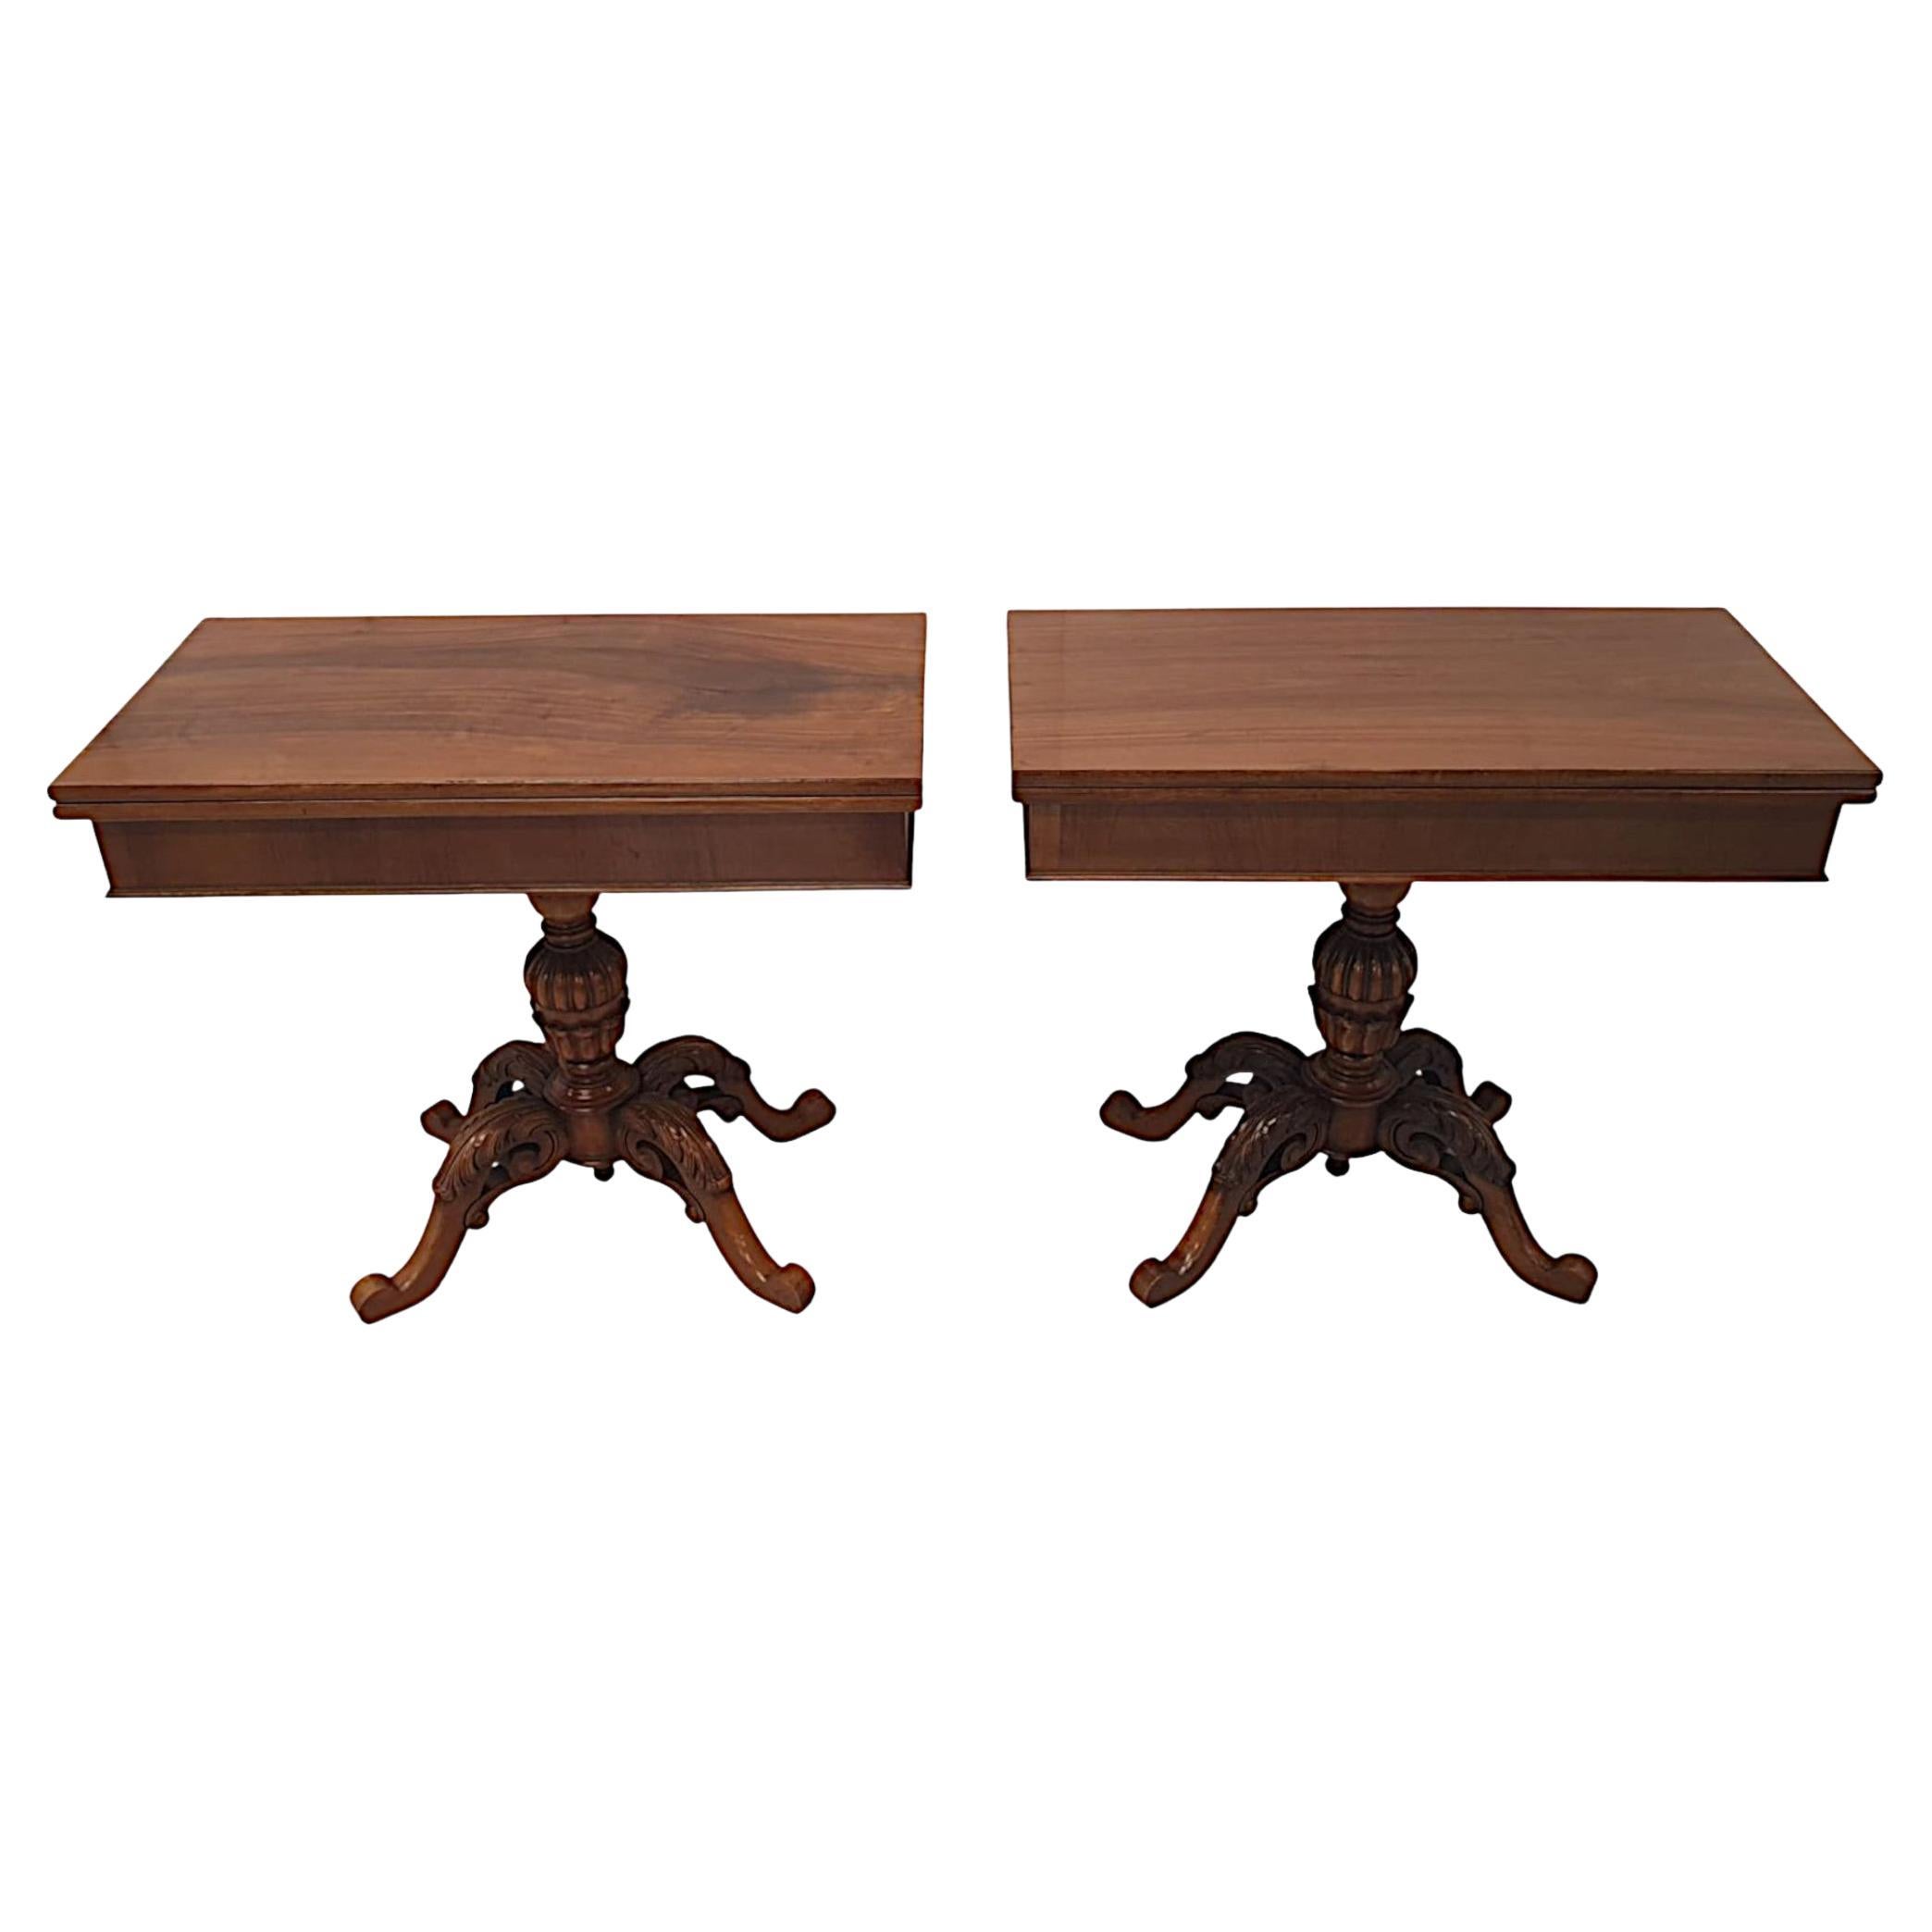 Superb Pair of Early 20th Century Turn over Leaf Card Tables For Sale